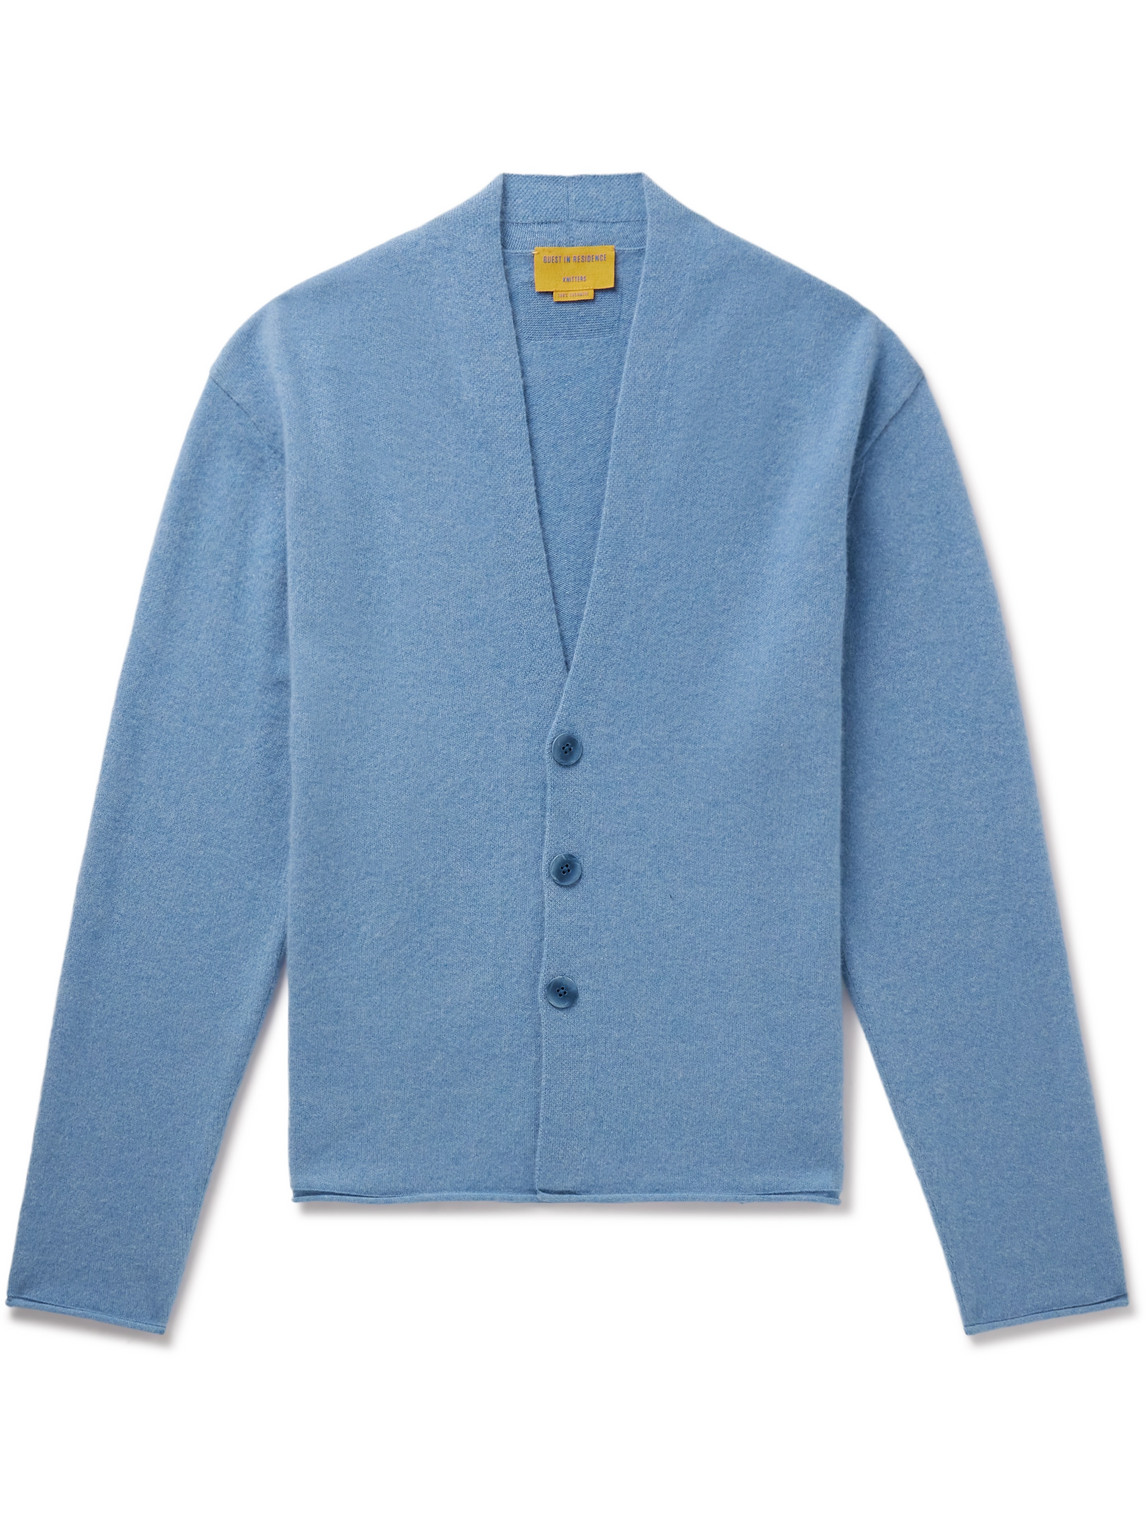 Guest In Residence - Everywear Cashmere Cardigan - Men - Blue - M von Guest In Residence